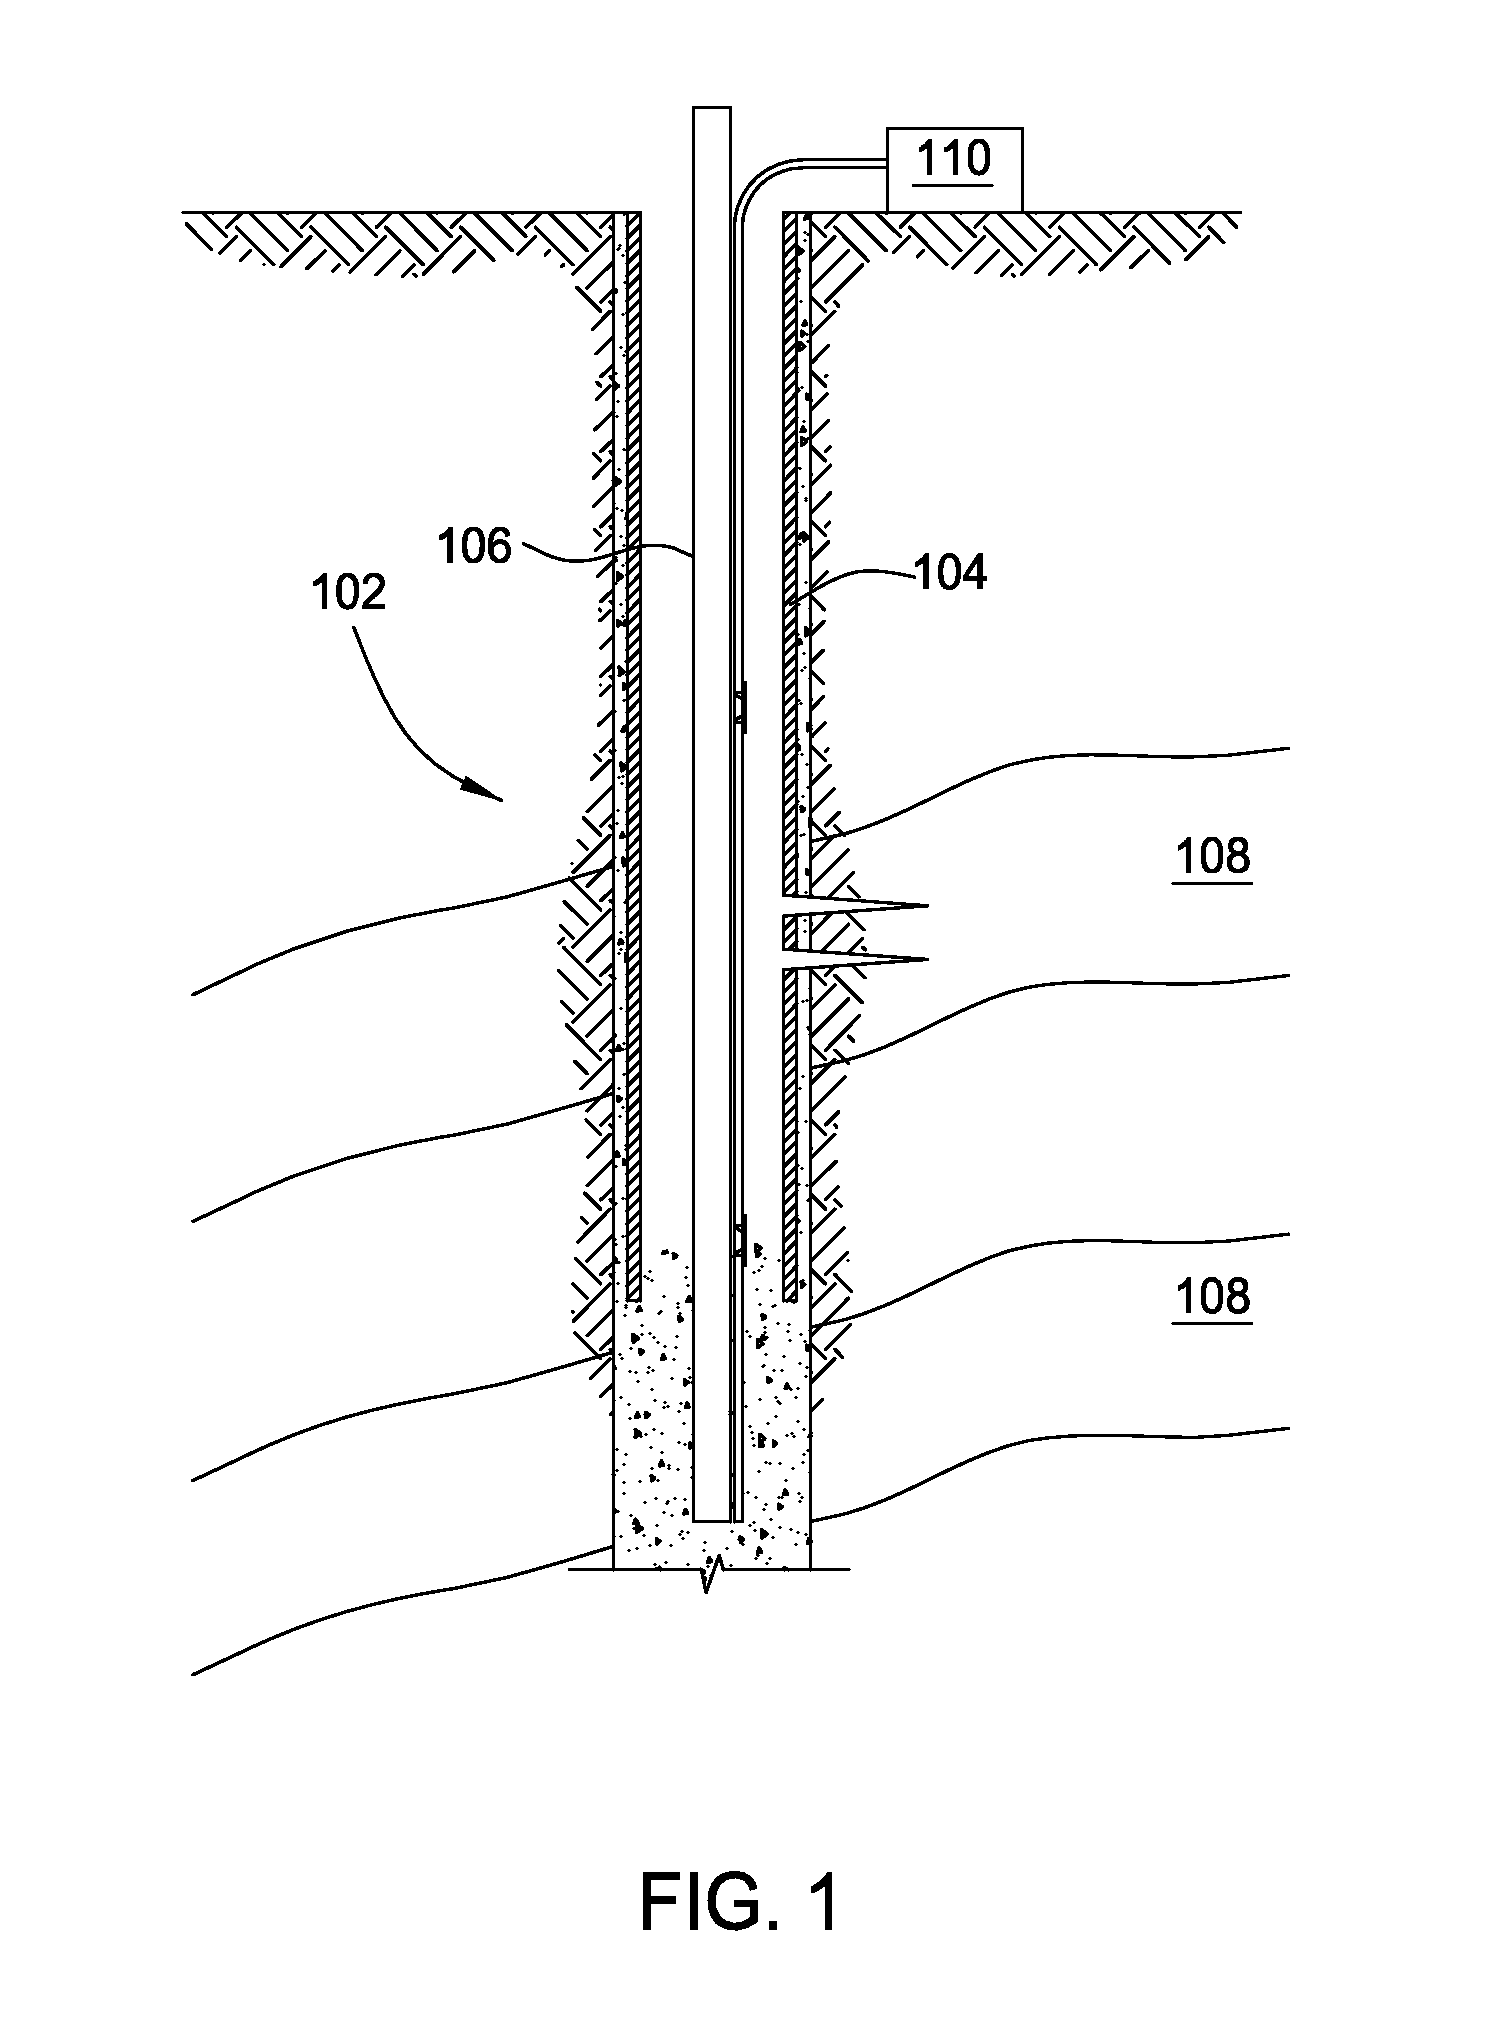 Sonic/acoustic monitoring using optical distributed acoustic sensing